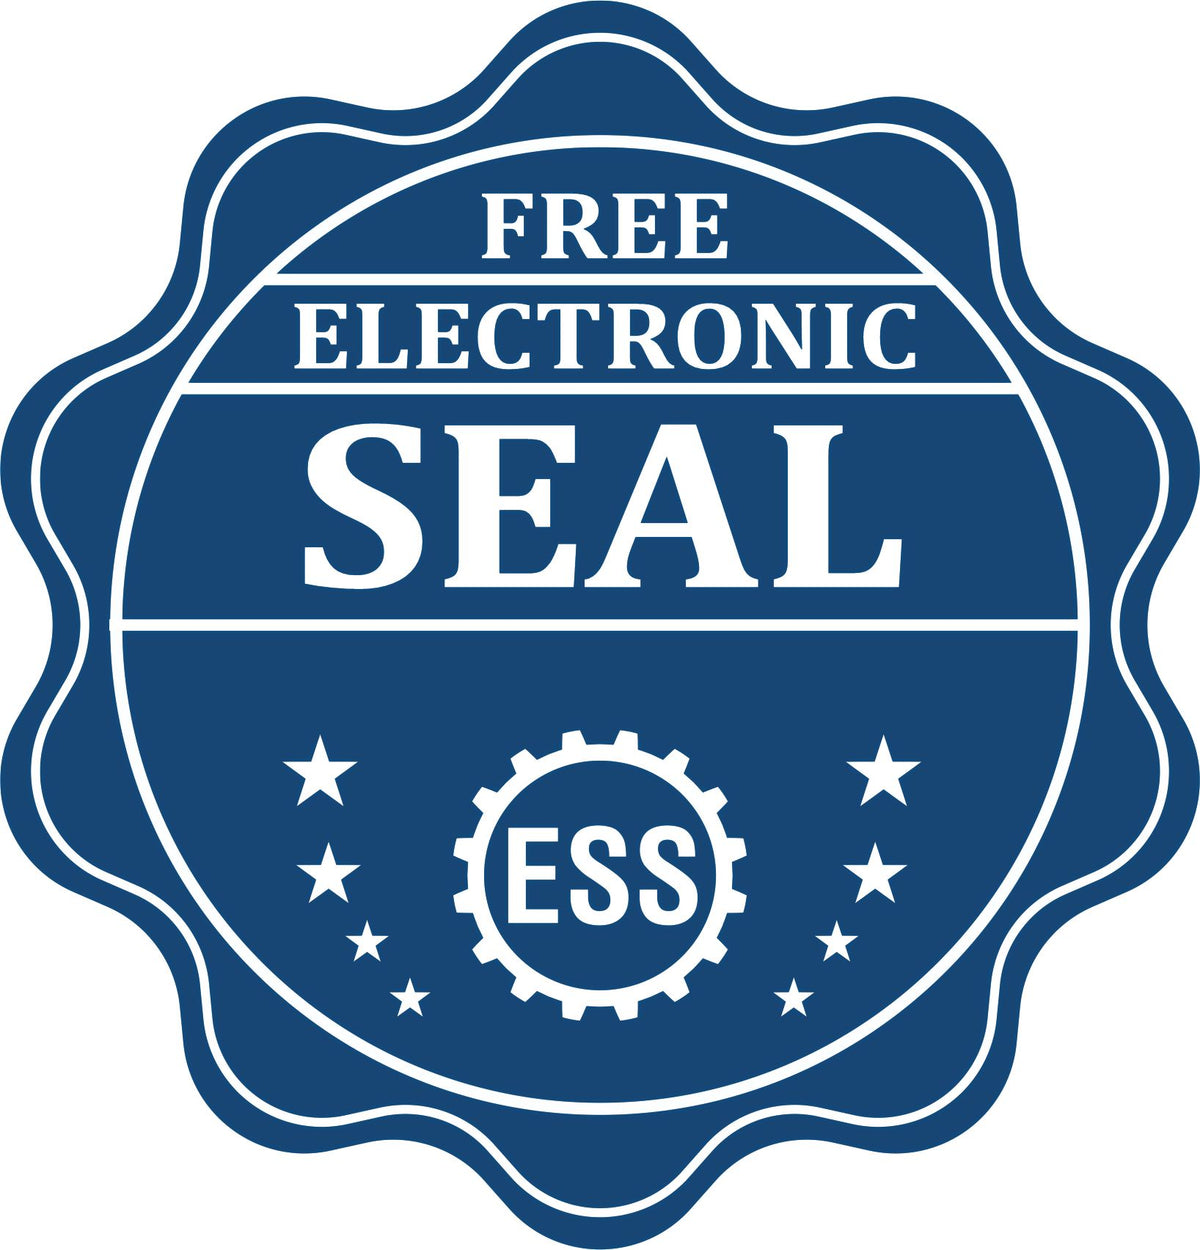 A badge showing a free electronic seal for the Slim Pre-Inked Mississippi Architect Seal Stamp with stars and the ESS gear on the emblem.